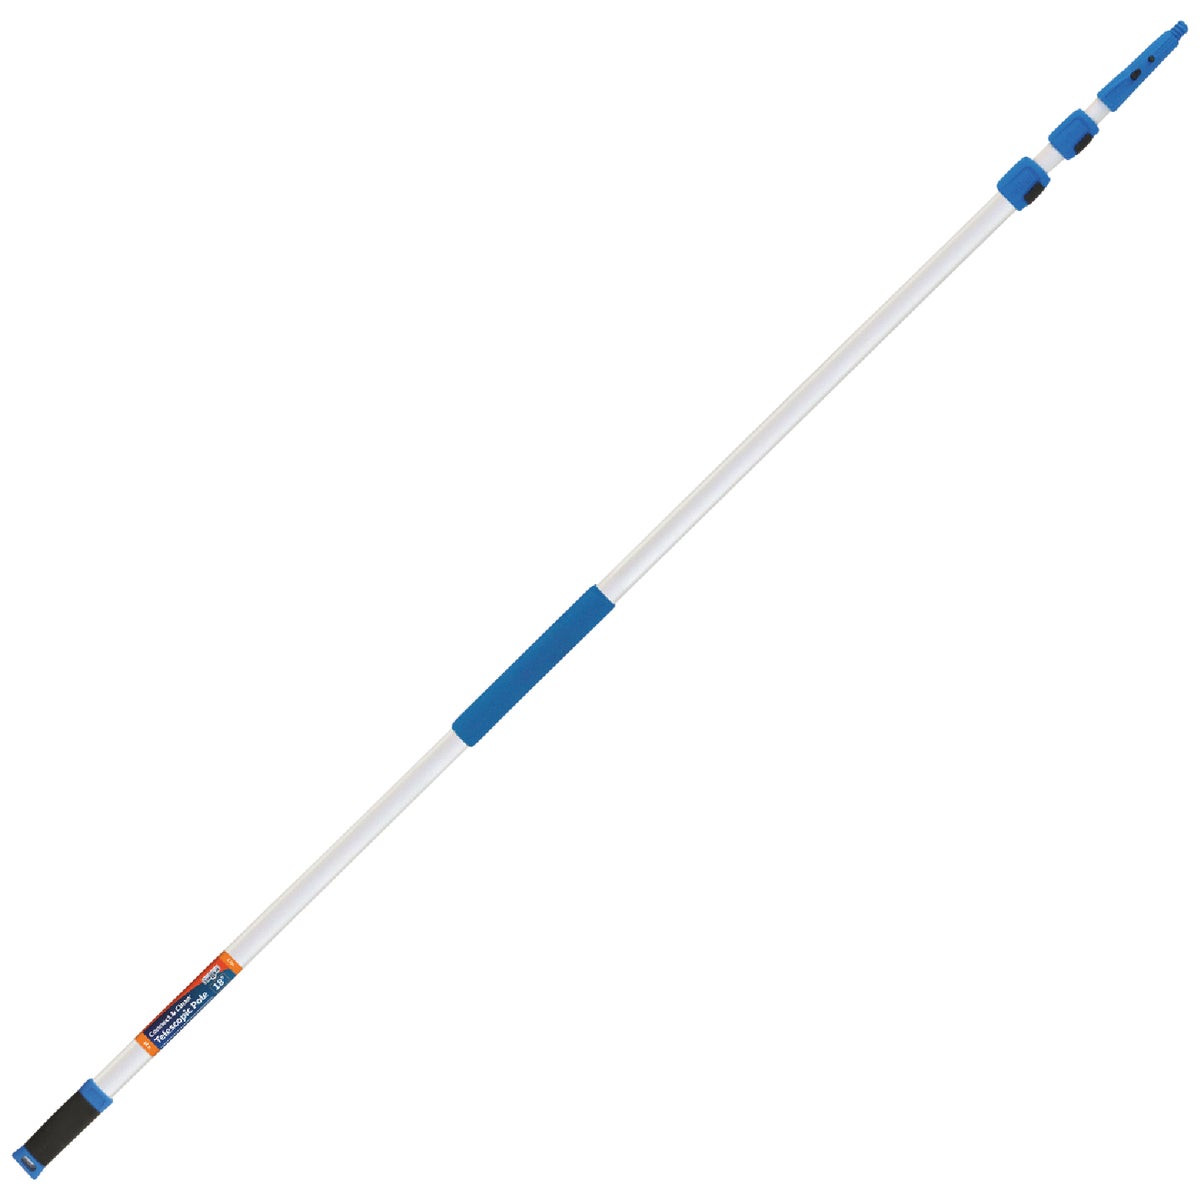 Unger Connect & Clean Professional 18 Ft. Aluminum Telescopic Pole with Locking Cone and Quick-Flip Clamps